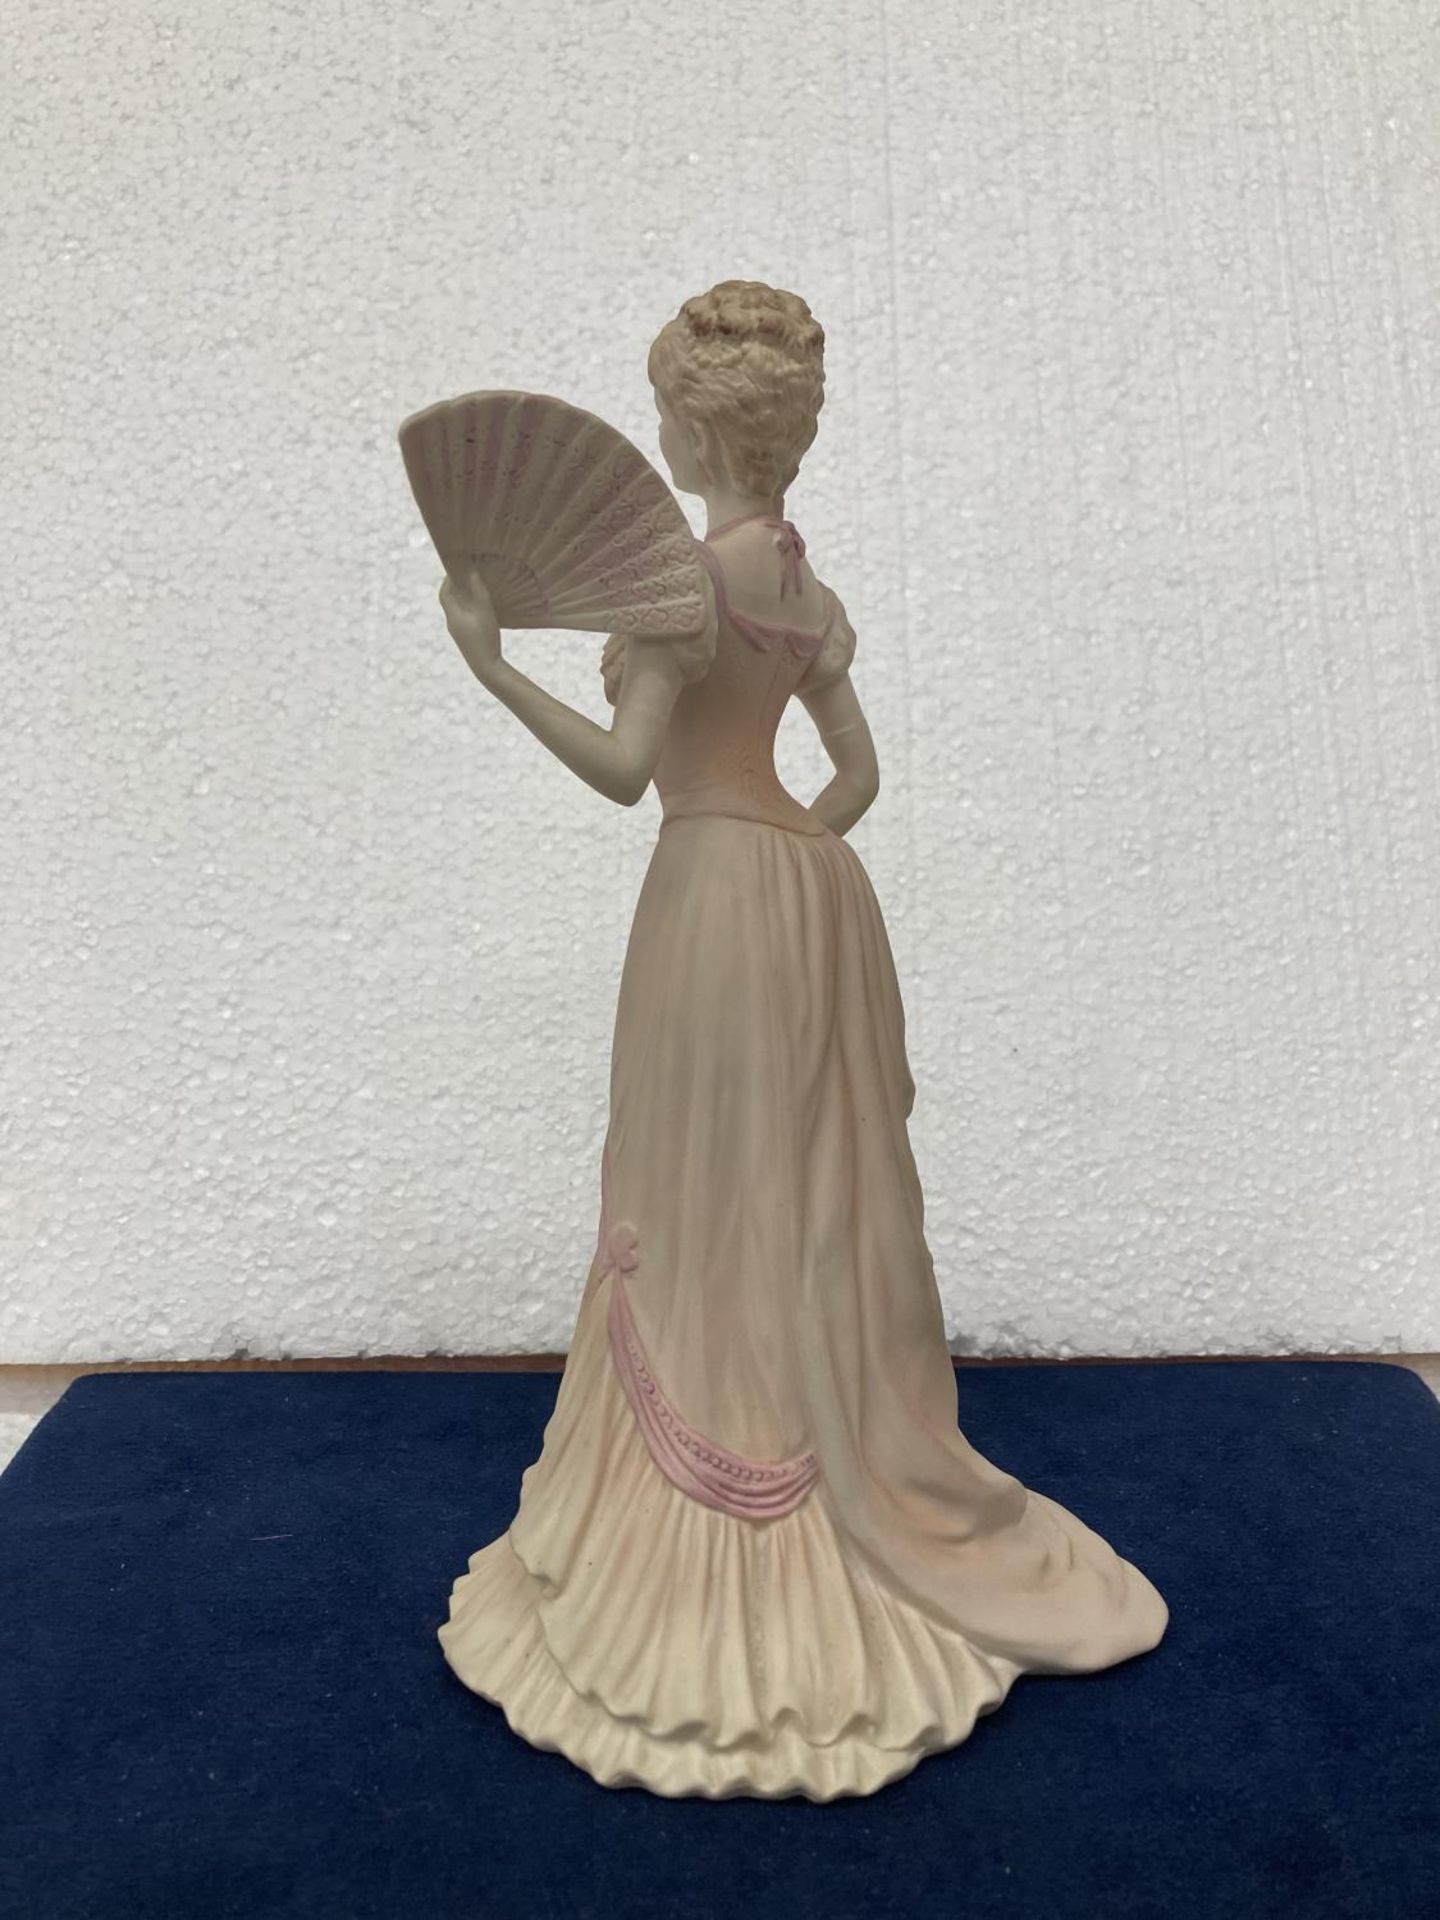 A COALPORT PORCELAIN FIGURINE FROM THE AGE OF ELEGANCE COLLECTION "EVENING AT THE OPERA" HAND - Image 6 of 8